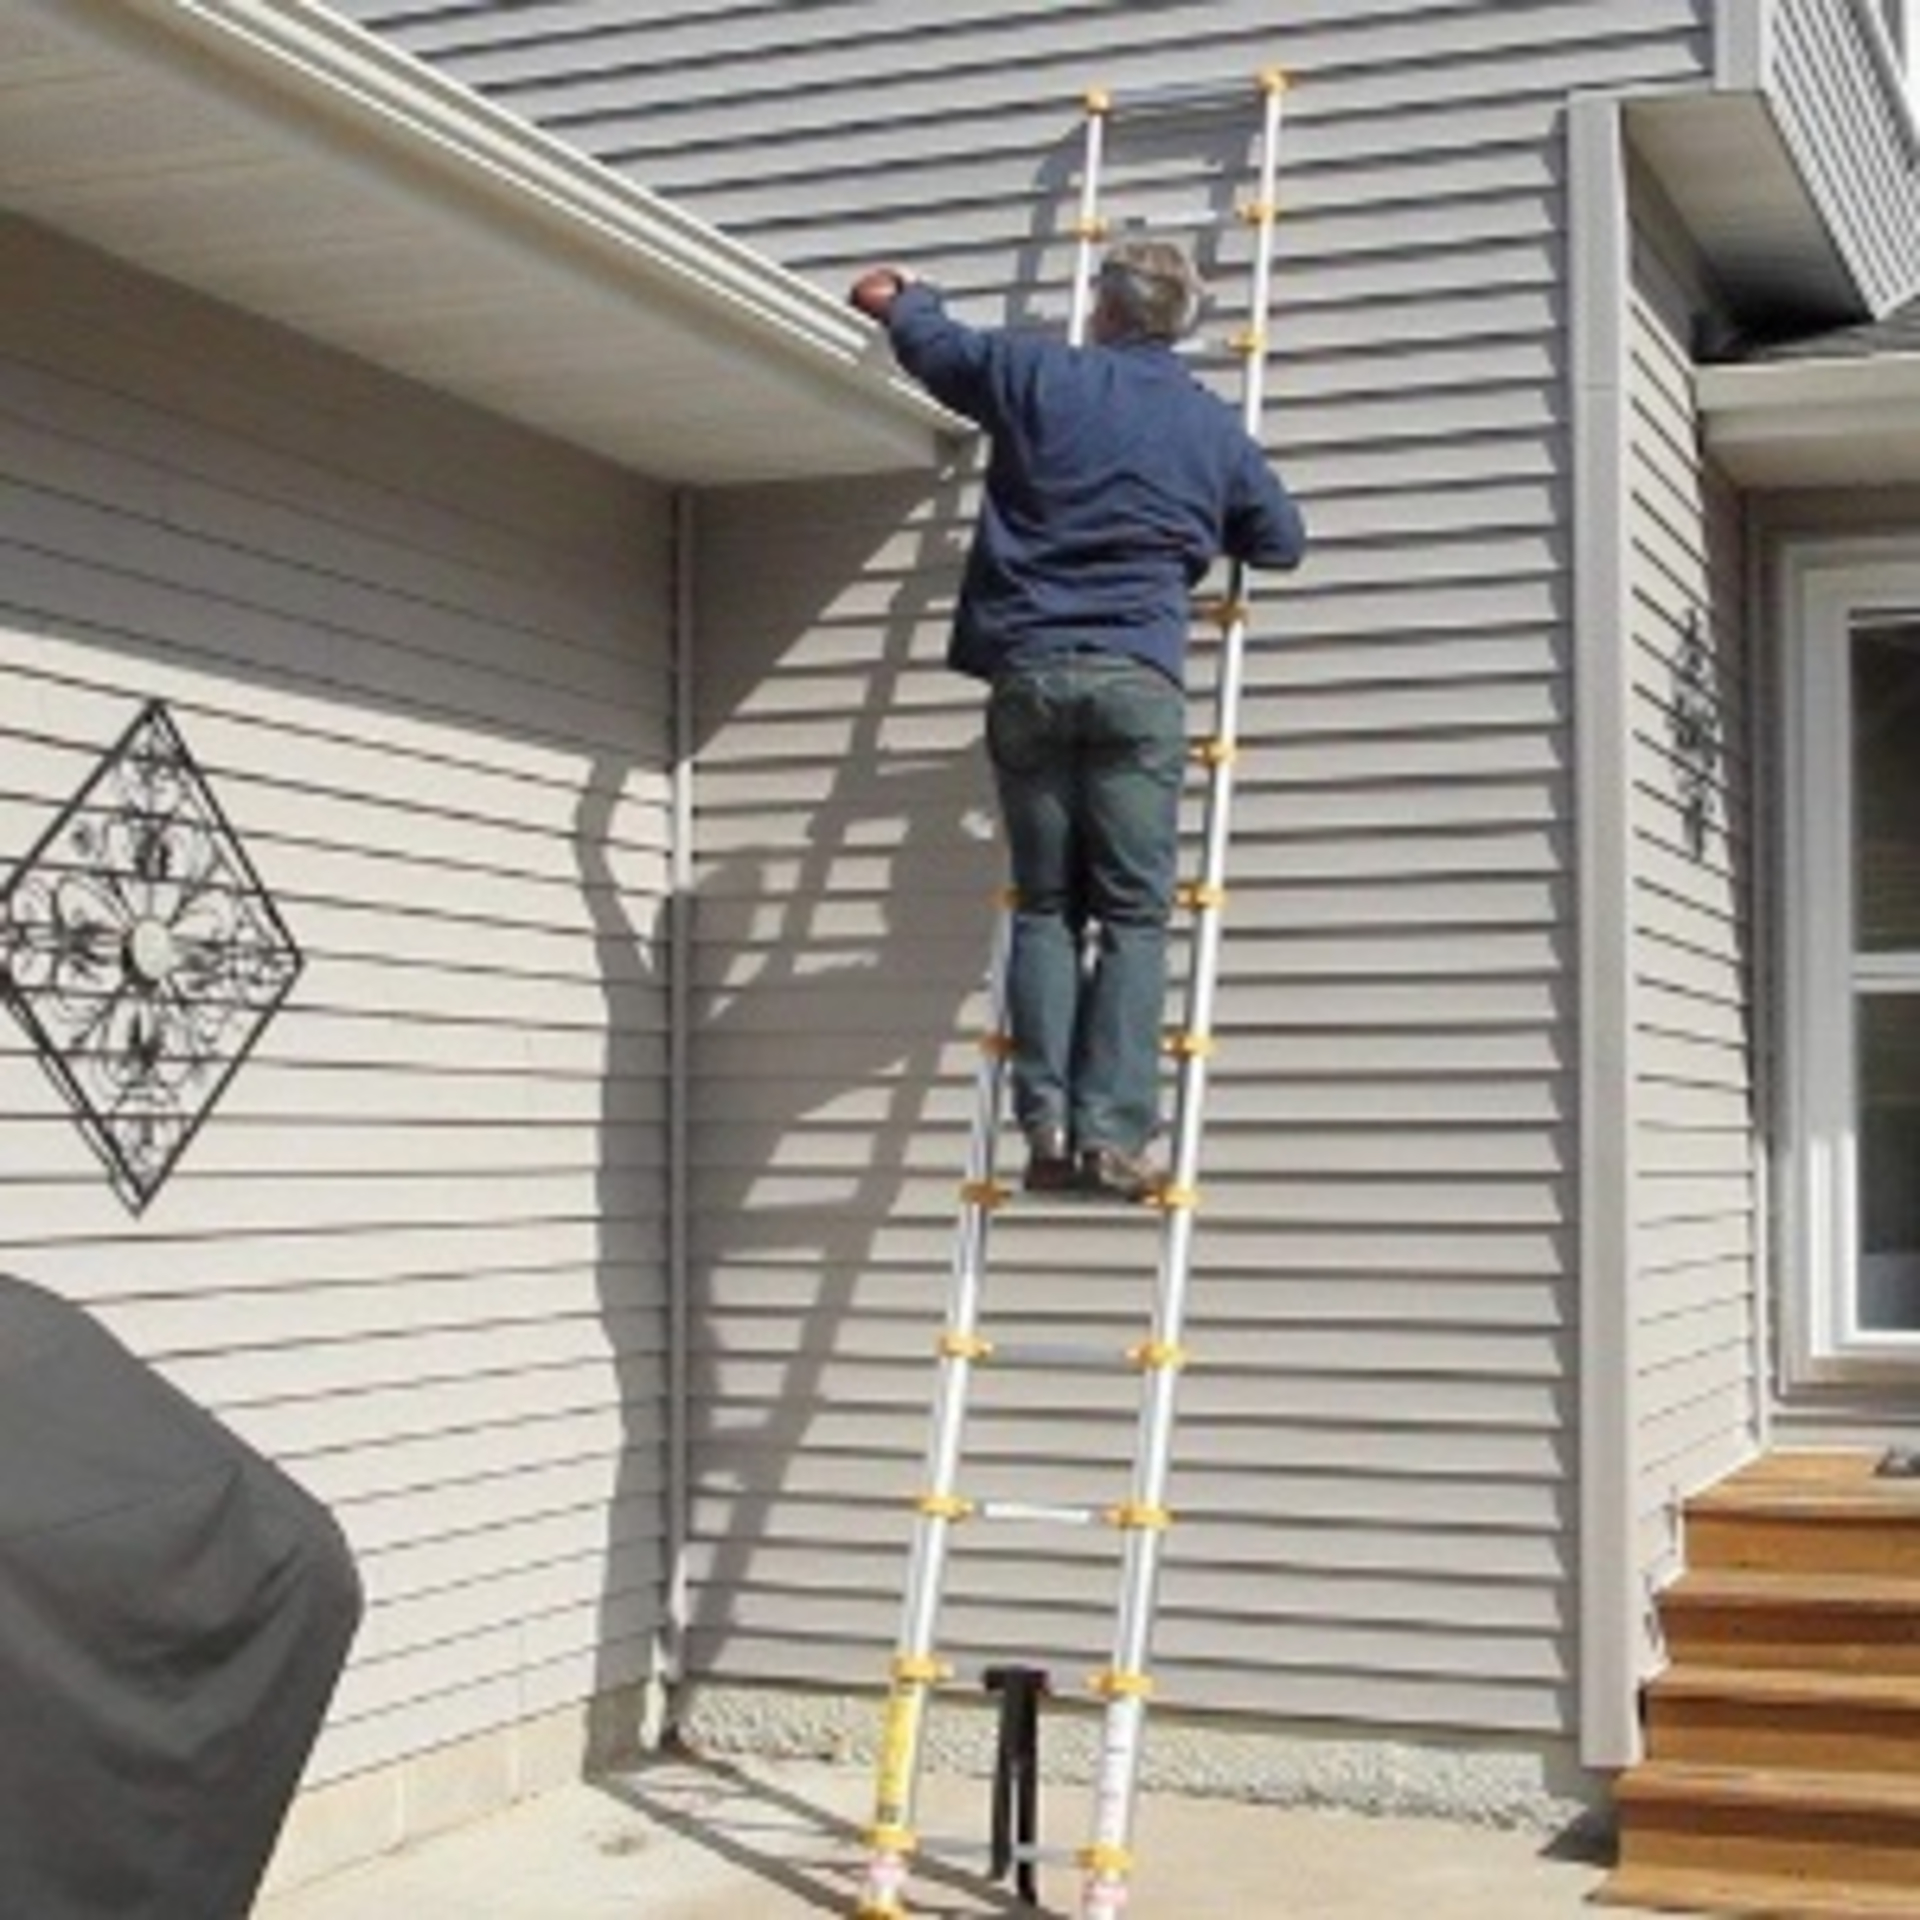 Ladder Vs Step Ladder - Which One Is Best For You?  image